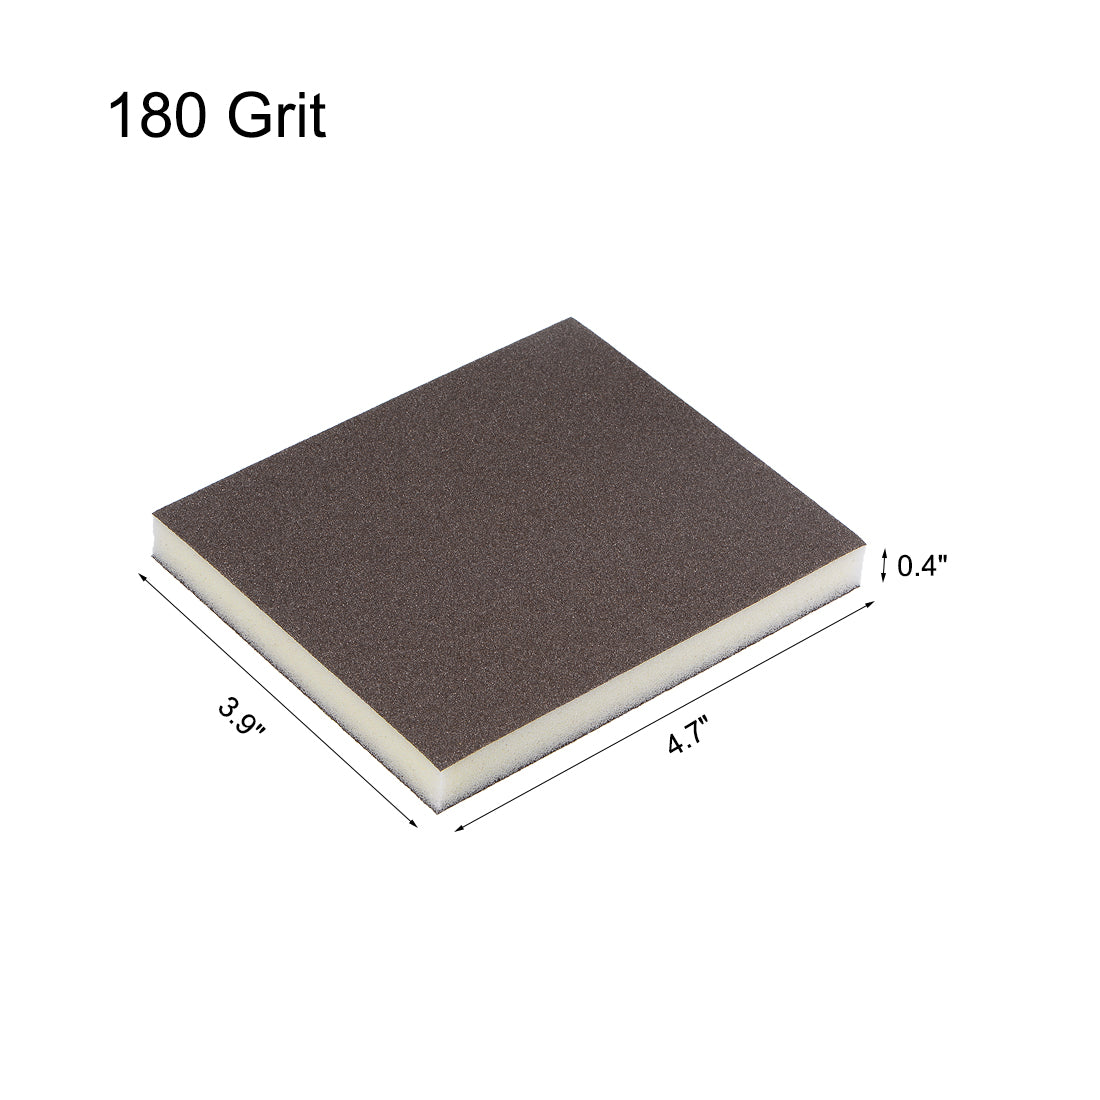 uxcell Uxcell Sanding Sponge 180 Grit Sanding Block Pad 4.7inch x 3.9inch x 0.4inch Brown 6pcs